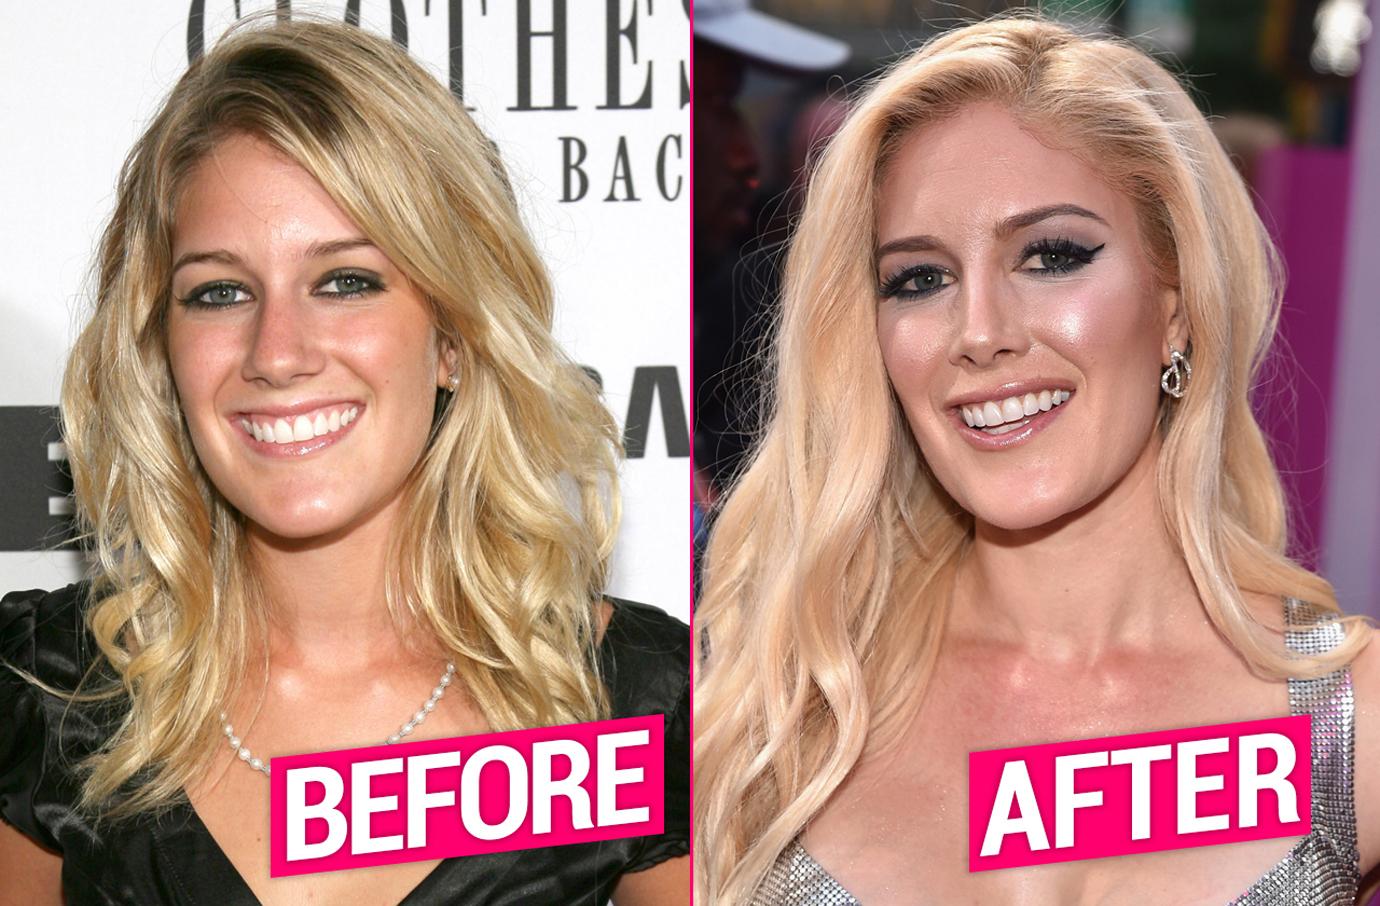 The Hills New Beginnings Cast Plastic Surgery Revealed